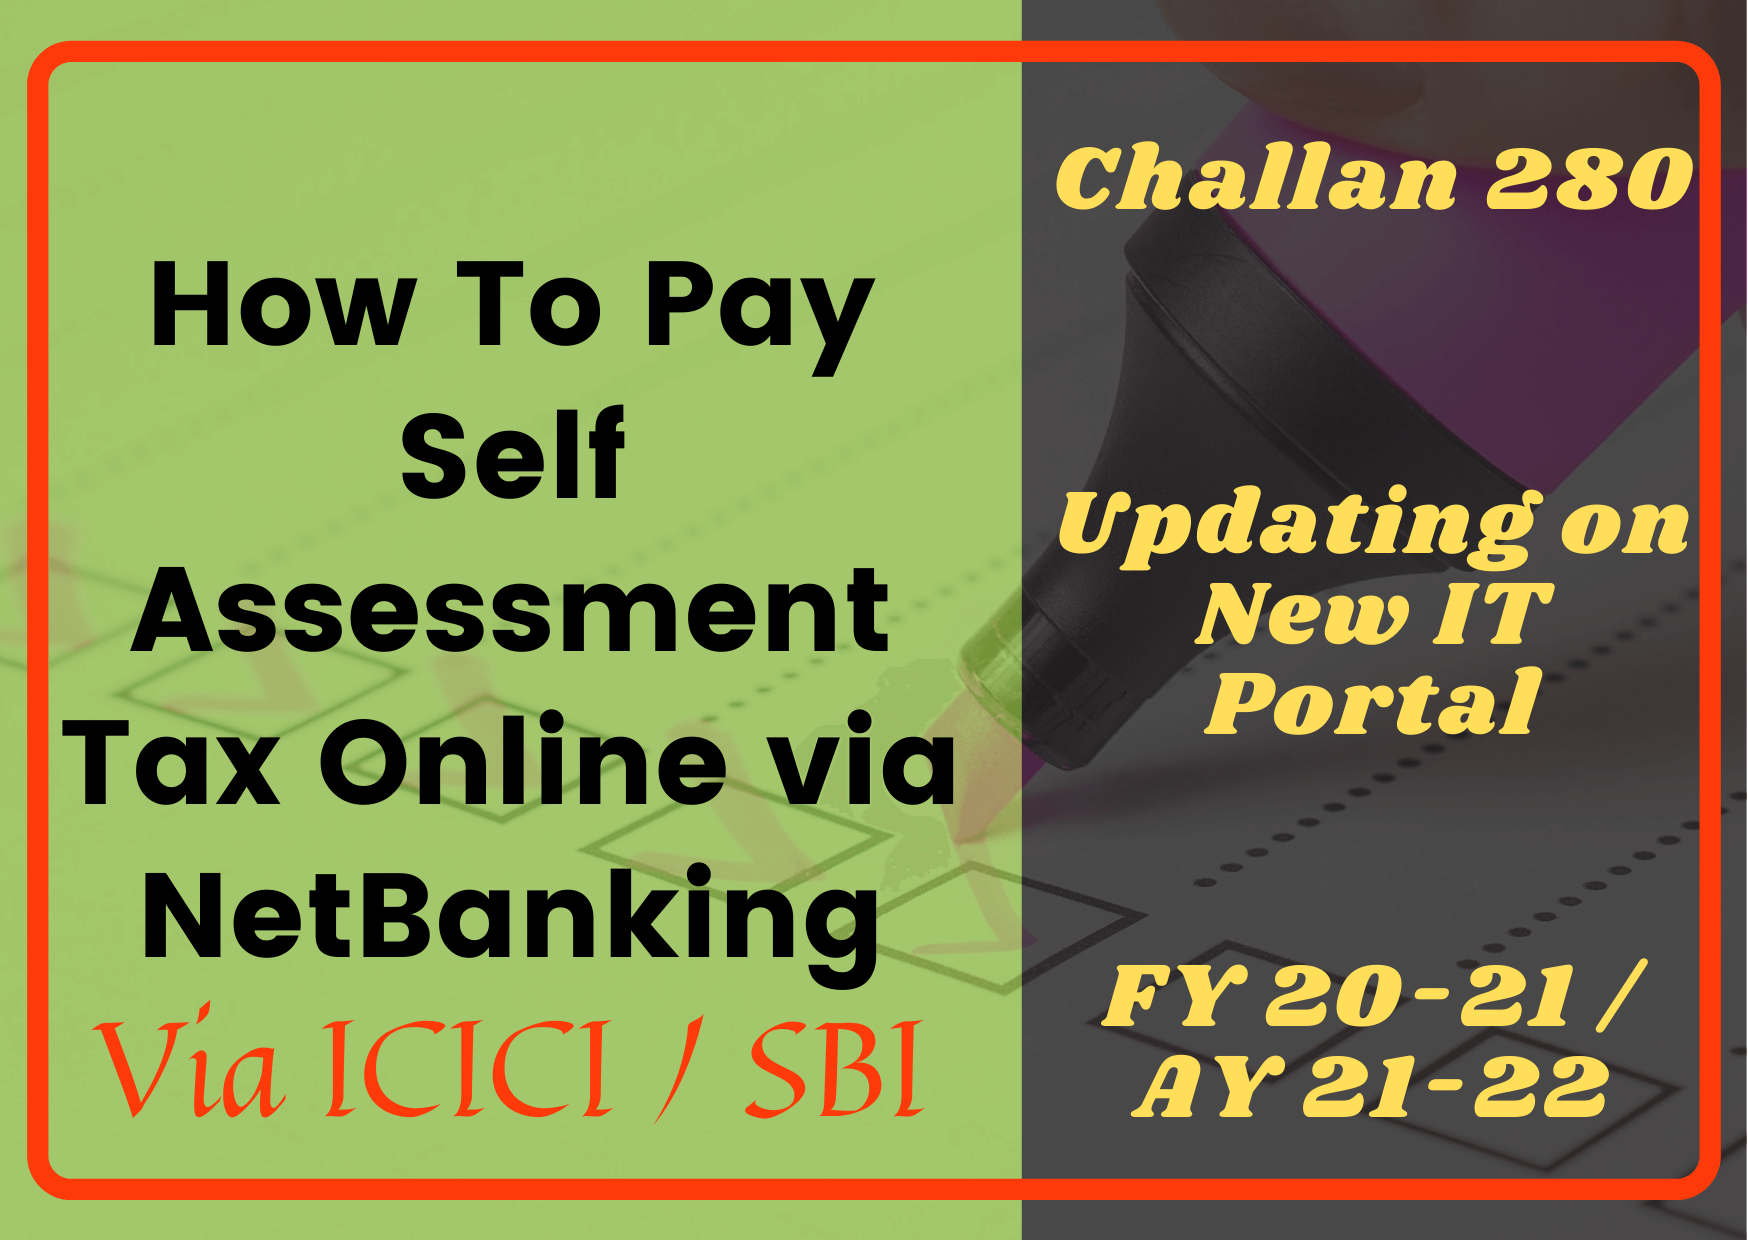 how-to-pay-self-assessment-tax-on-new-income-tax-portal-save-more-money